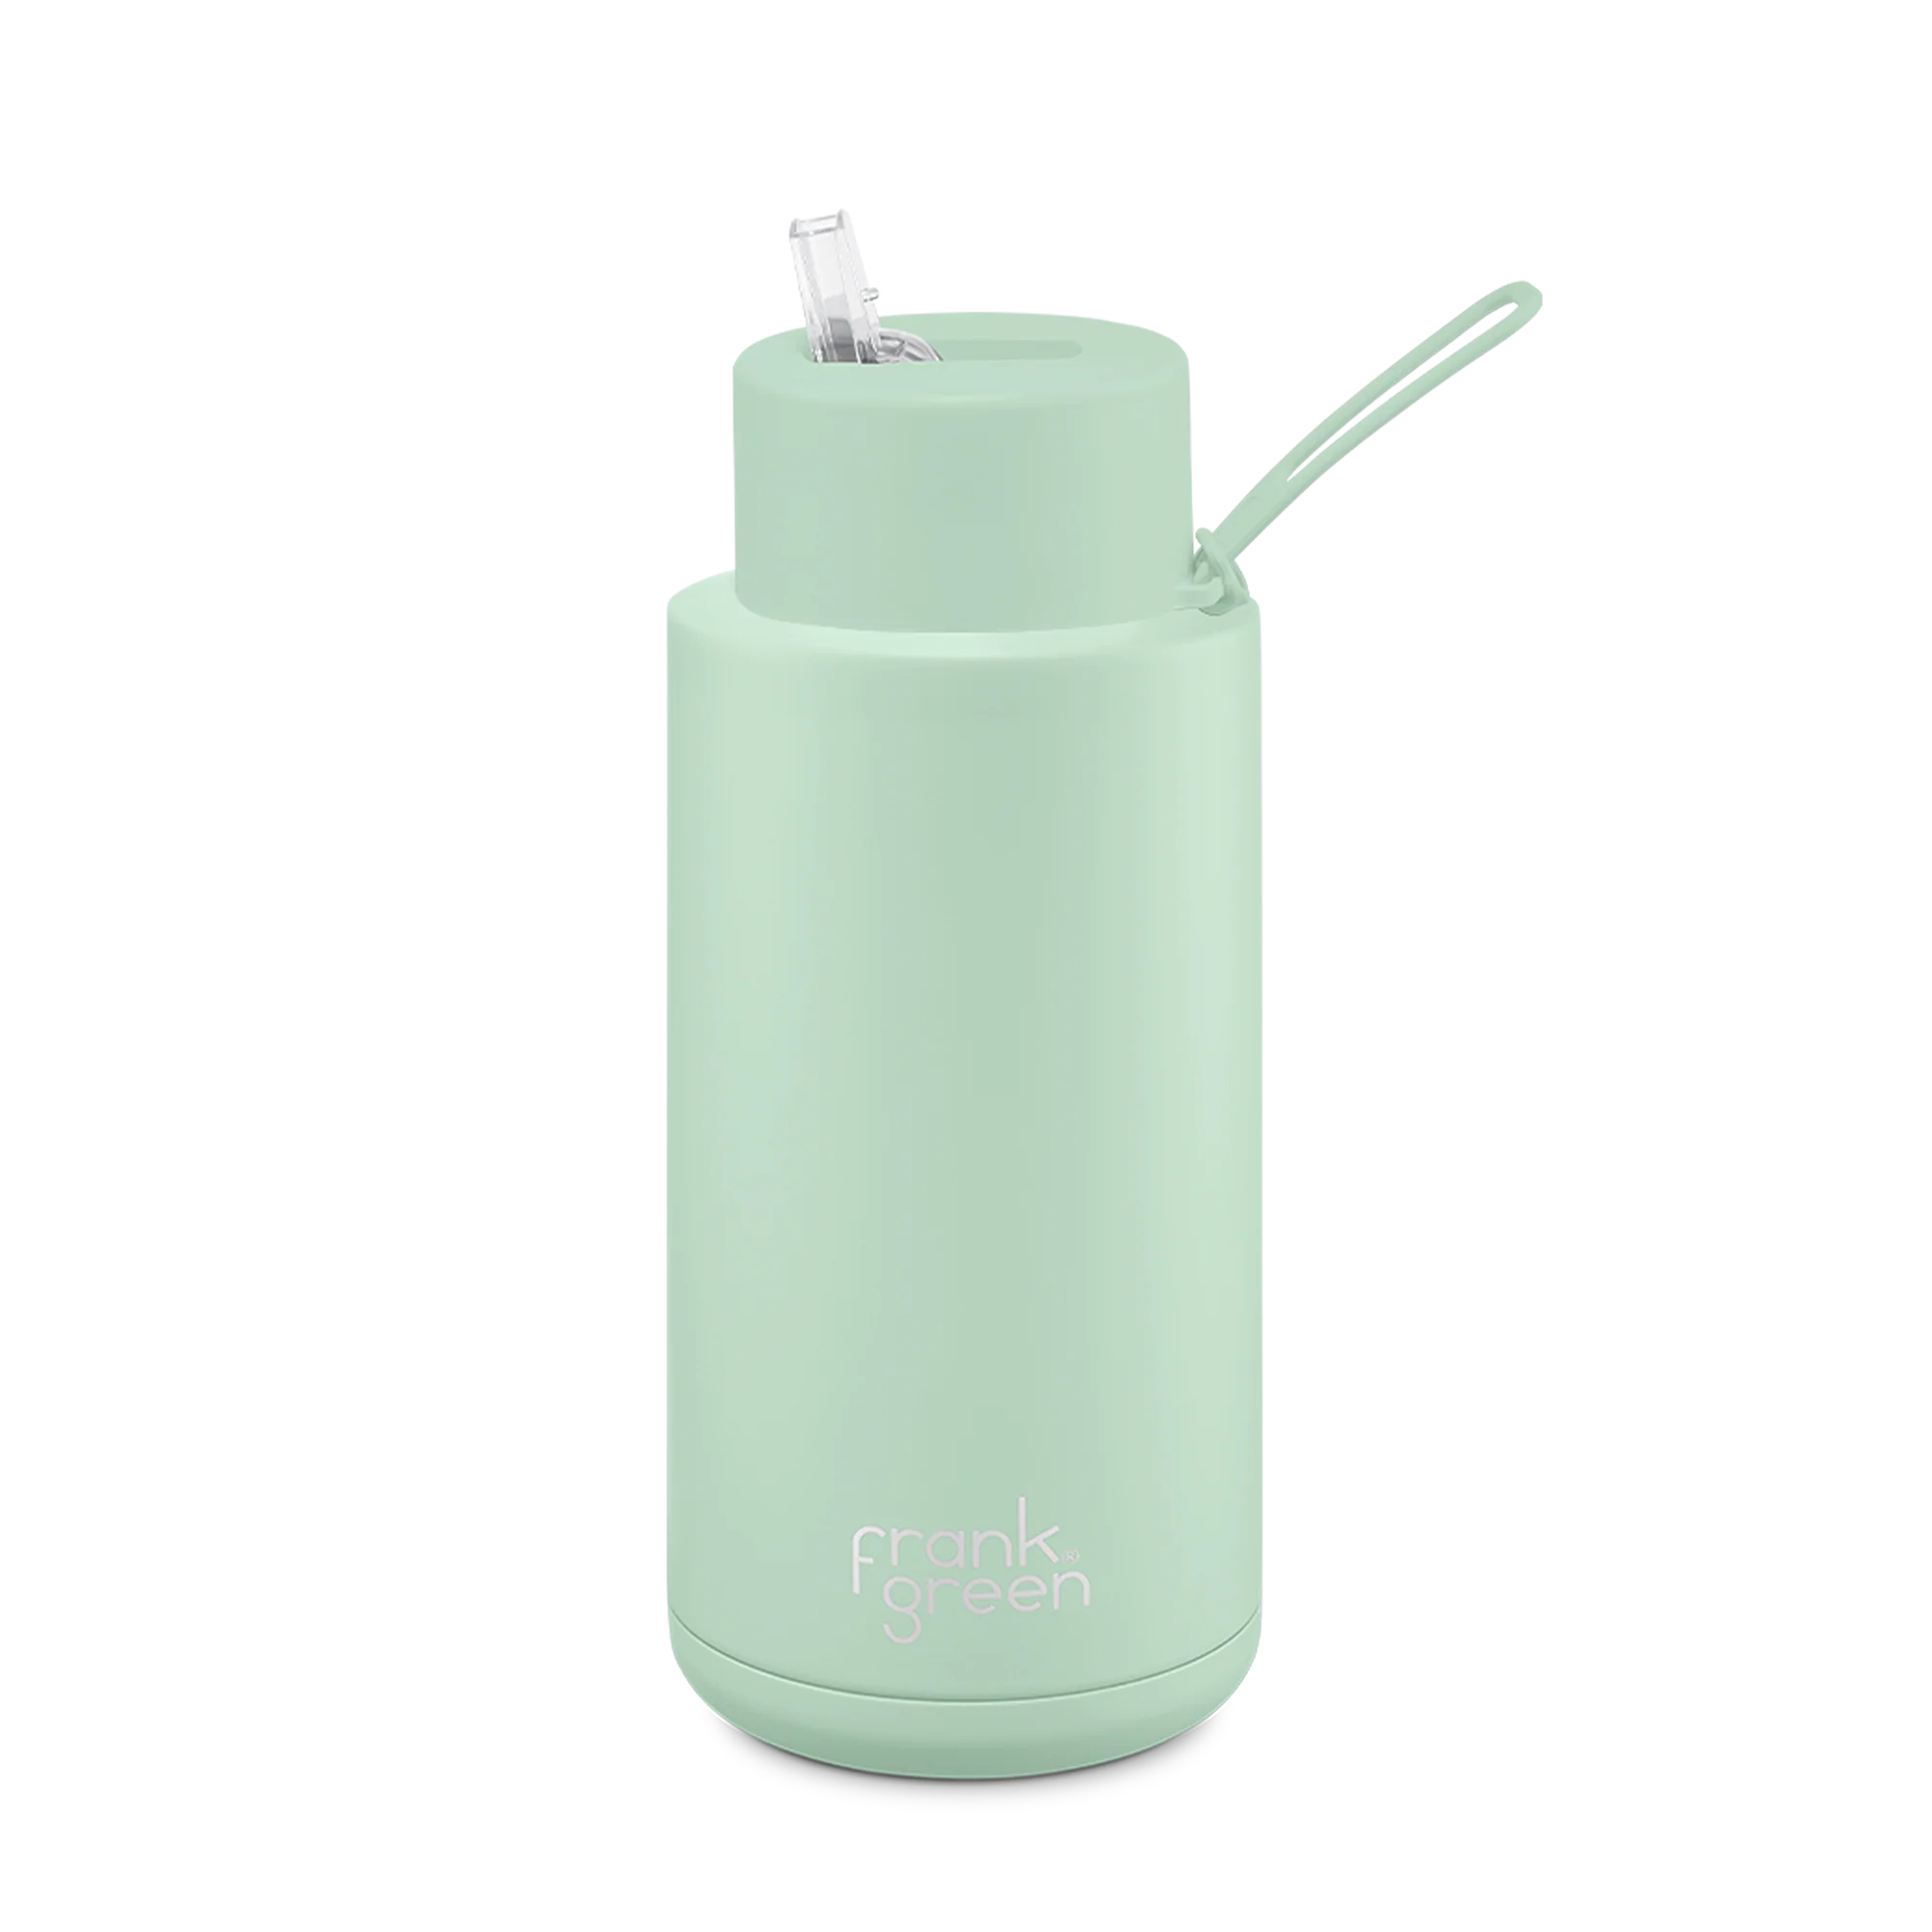 Frank Green Stainless Steel Ceramic Reusable Bottle Mint Gelato With Straw And Strap 34oz/1,000ml